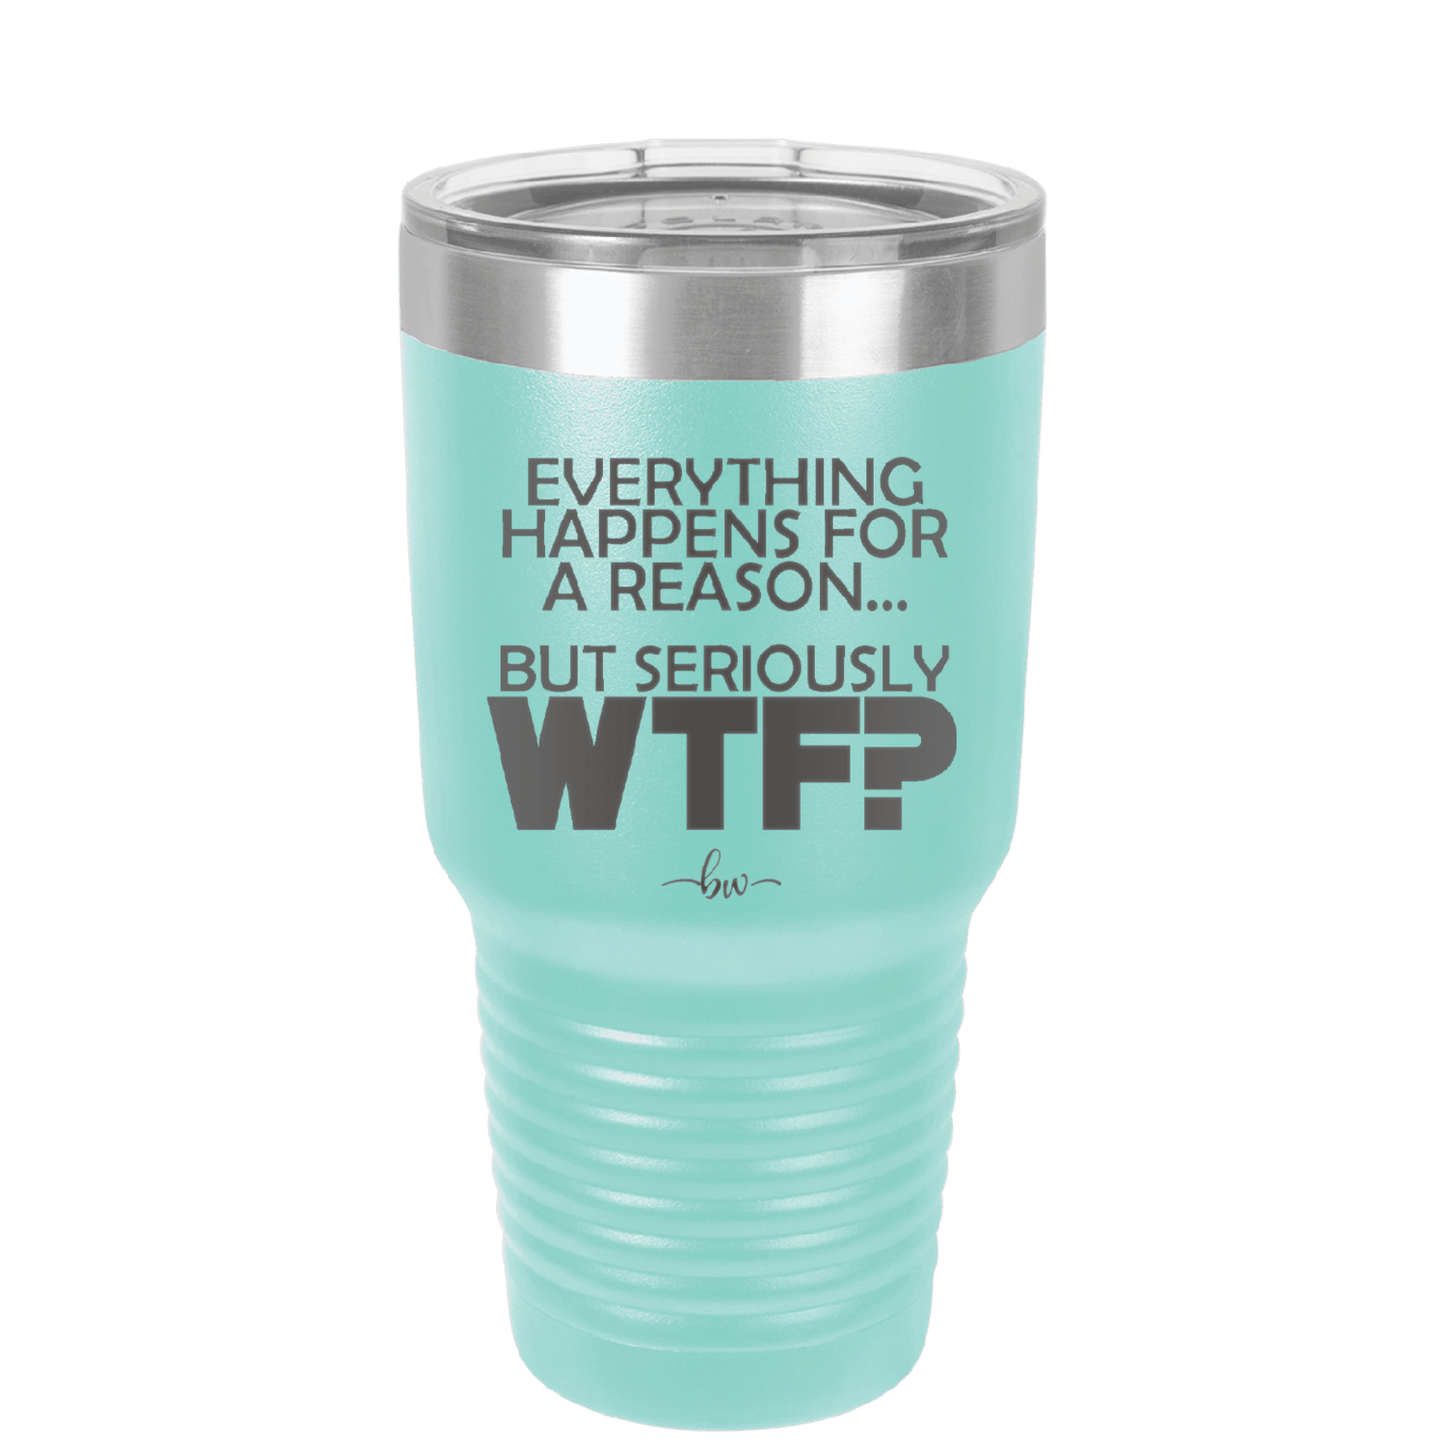 Everything Happens for a Reason but Seriously WTF - Laser Engraved Stainless Steel Drinkware - 1631 -